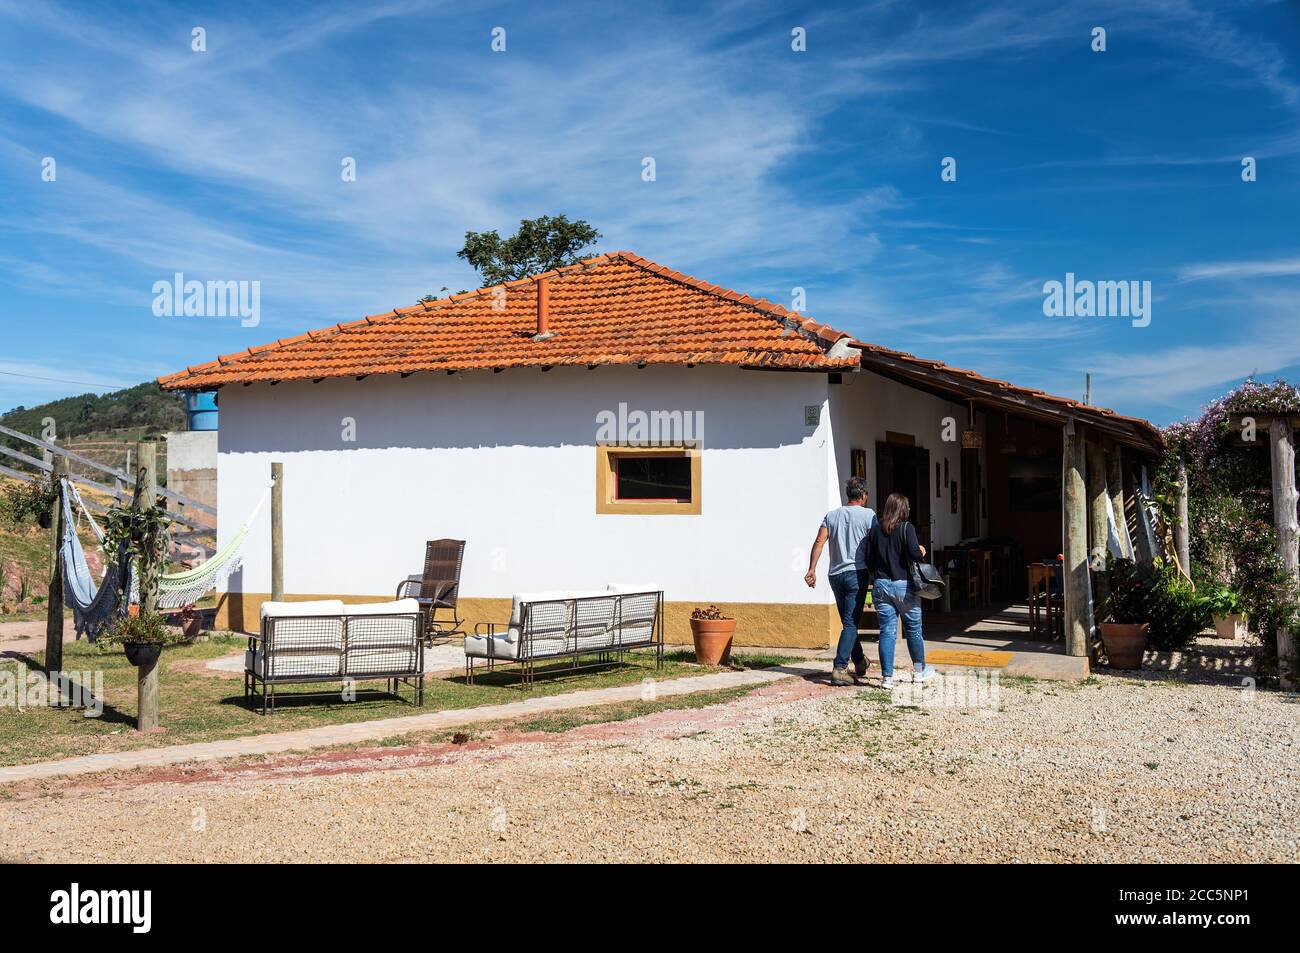 Facade of cosy Casa da Serra restaurant under sunny blue sky while a couple walks in for lunch. Restaurant located at KM 60 of Salvador Pacetti road. Stock Photo